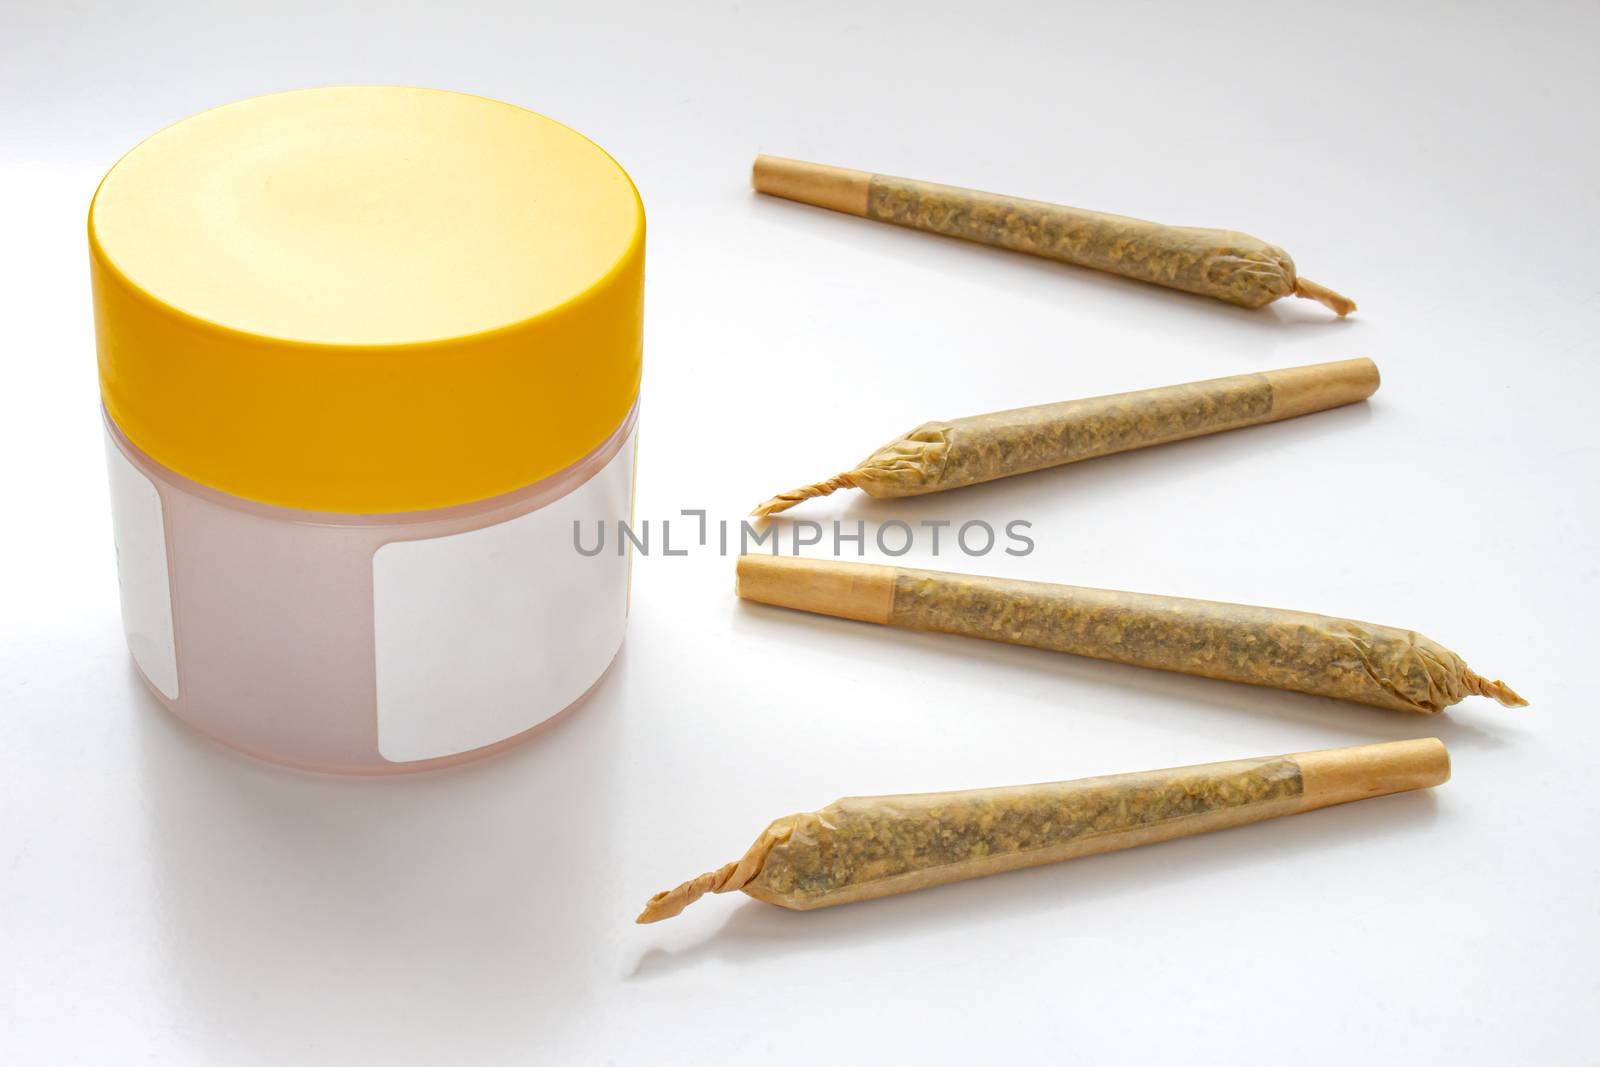 A Cannabis white and yellow plastic packaging container with Cigarettes, Prerolls or Joints and a on a white background by oasisamuel